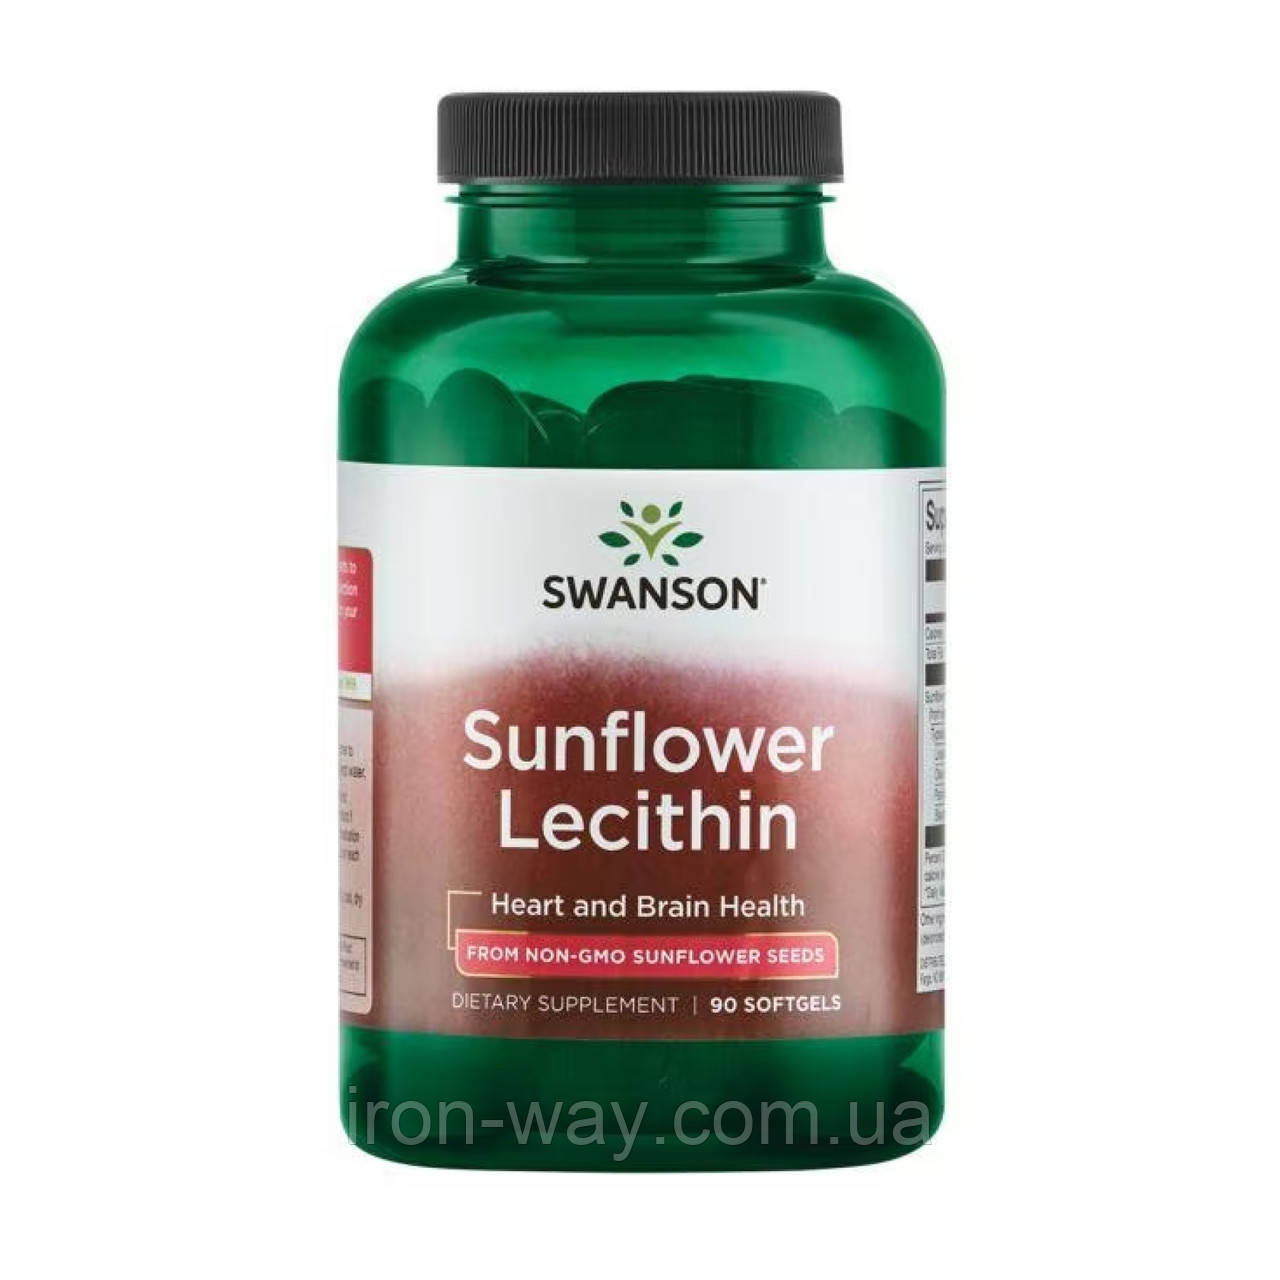 Sunflower Lecithin from Non-Gmo Sunflower Seeds 1200mg - 90 sgels